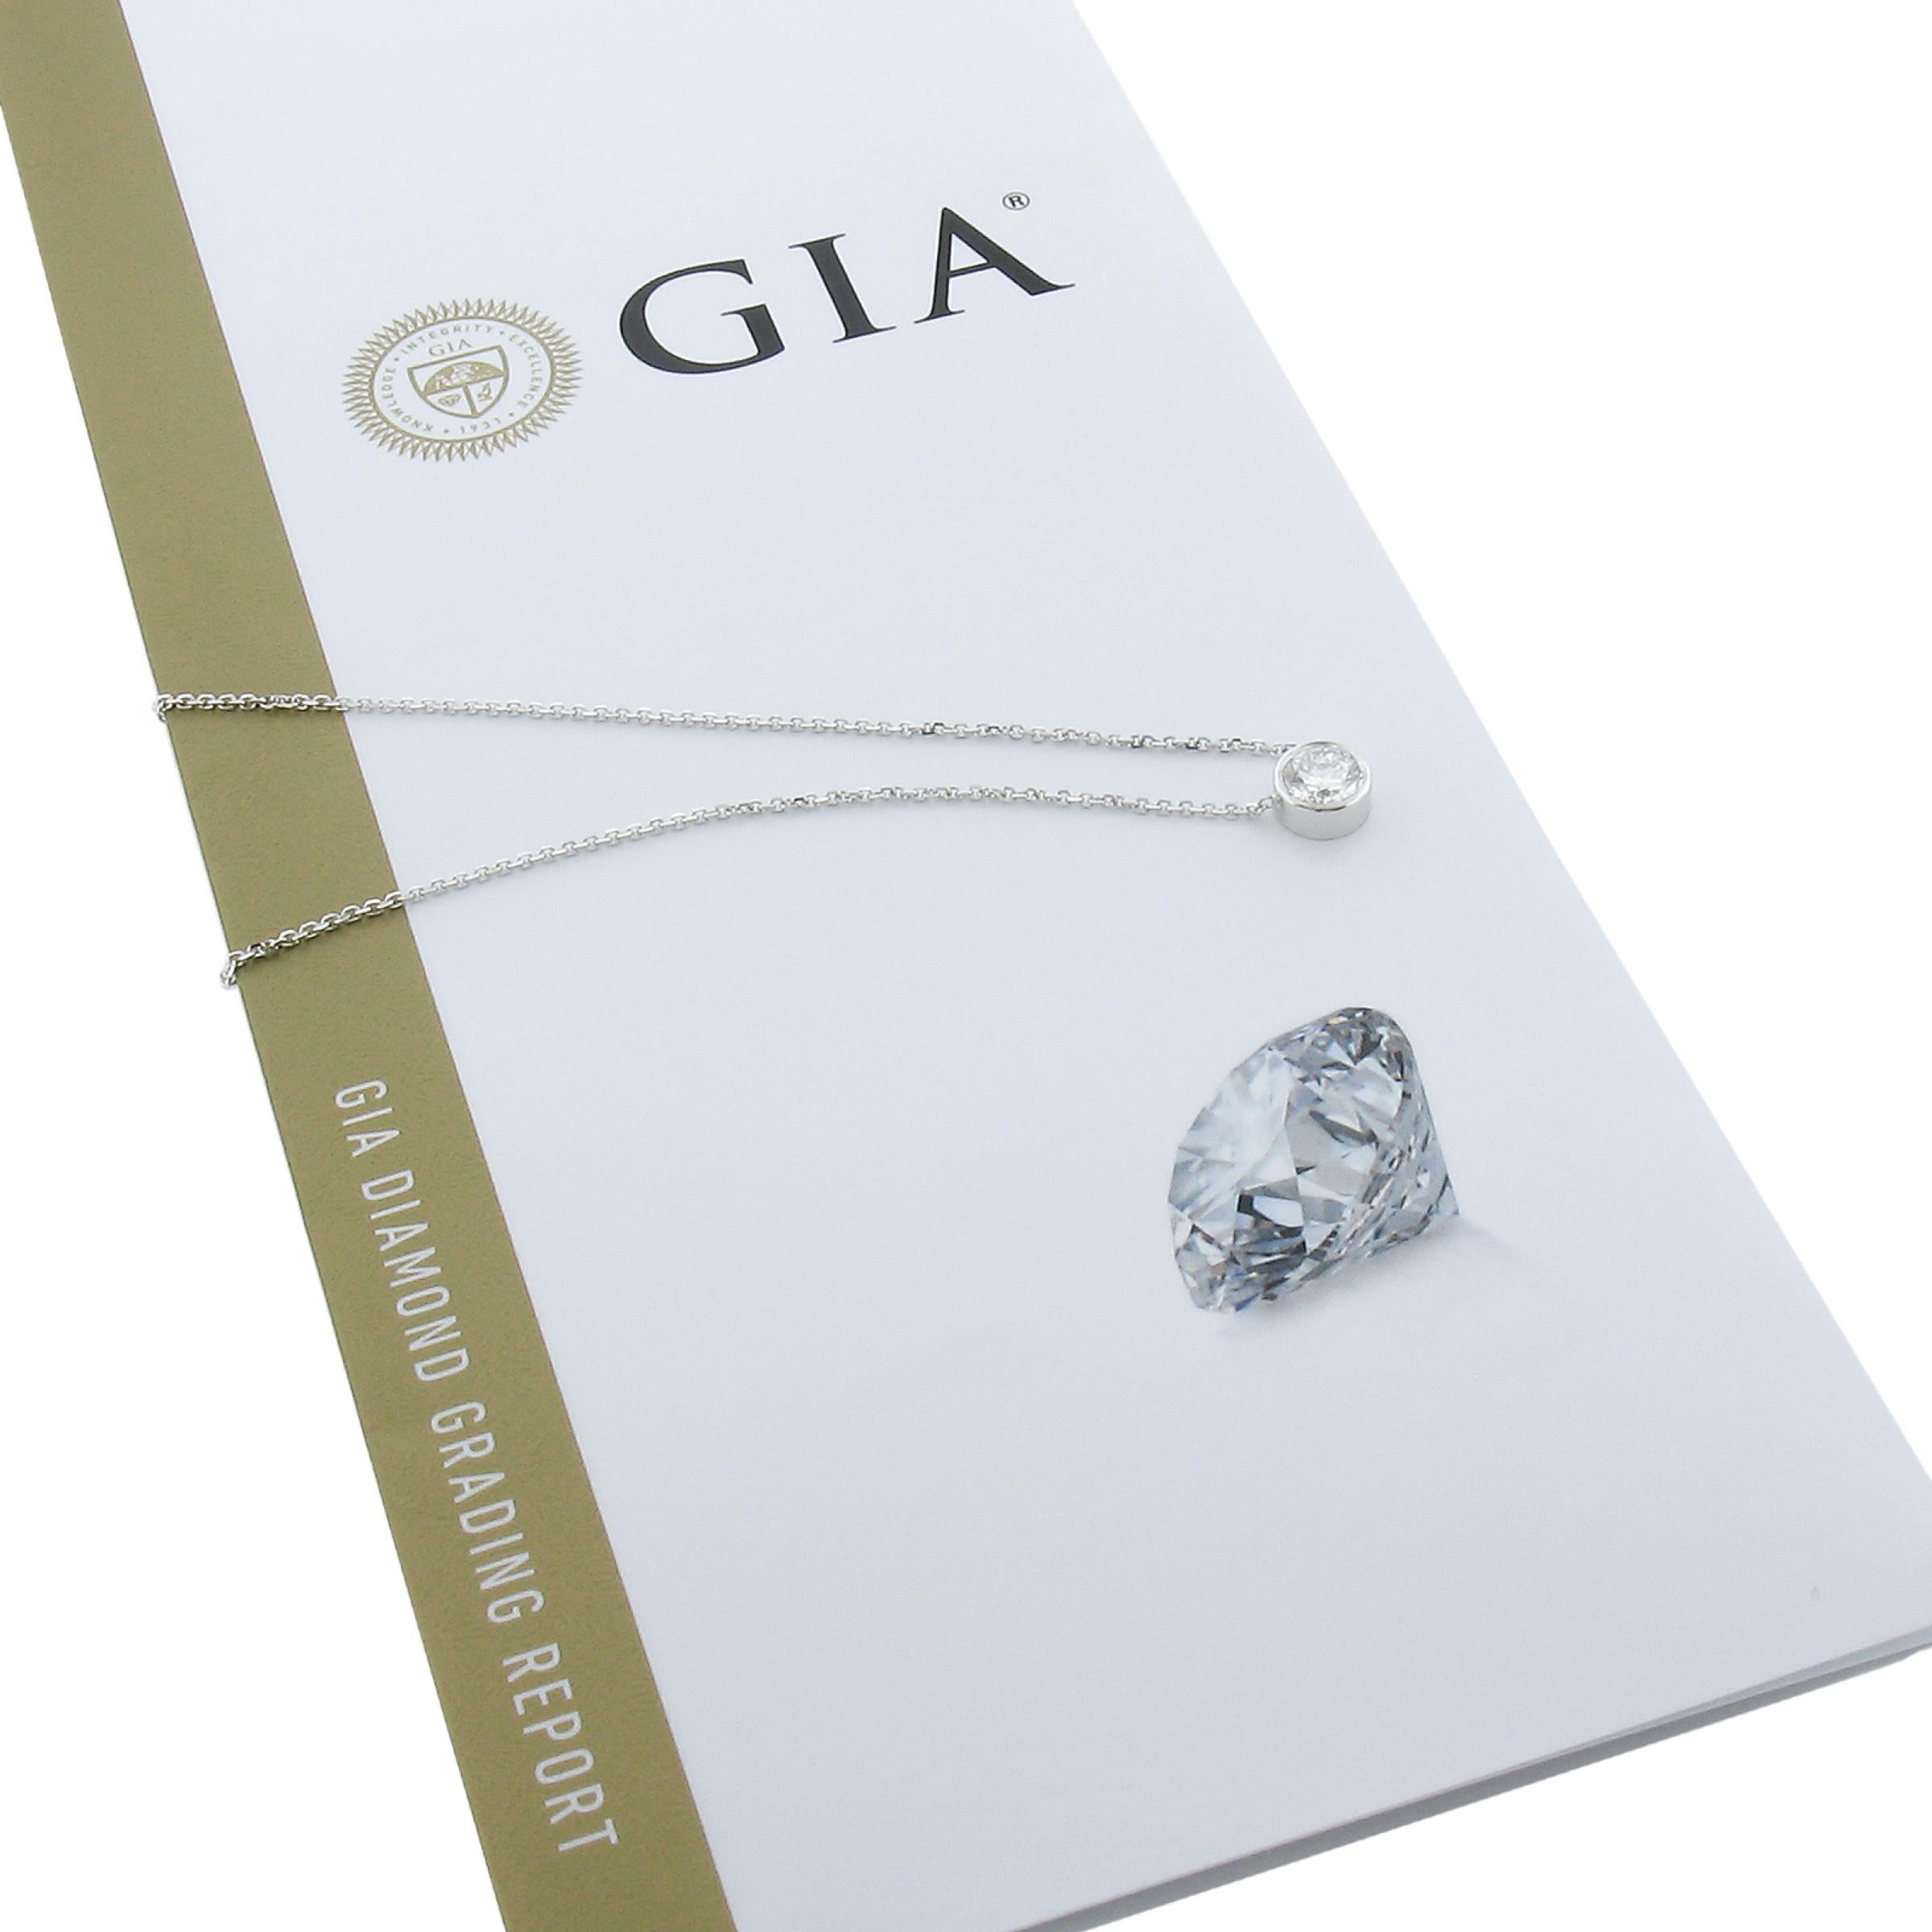 Here we have a gorgeous, elegant, brand new, diamond pendant necklace crafted in solid 14k white gold. The necklace features a fine quality, GIA certified, round brilliant cut diamond solitaire neatly bezel set at the center. This stunning diamond